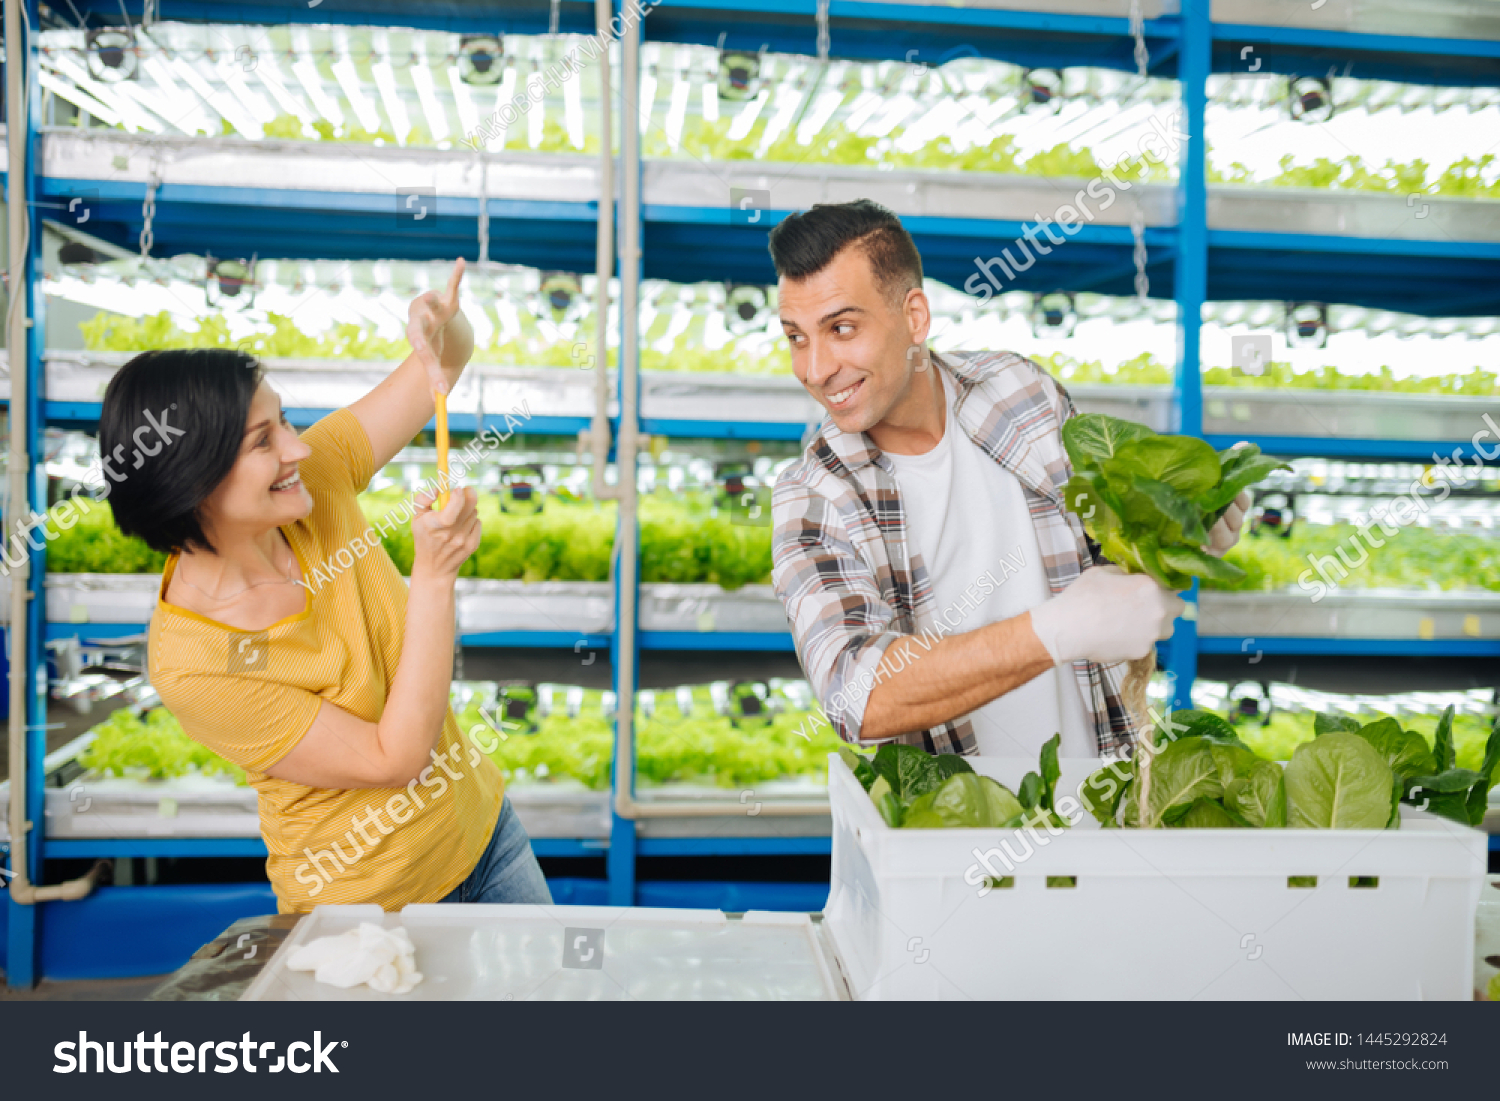 Loving wife. Loving wife making photo of her handsome husband holding lettuce while standing in greenhouse #1445292824